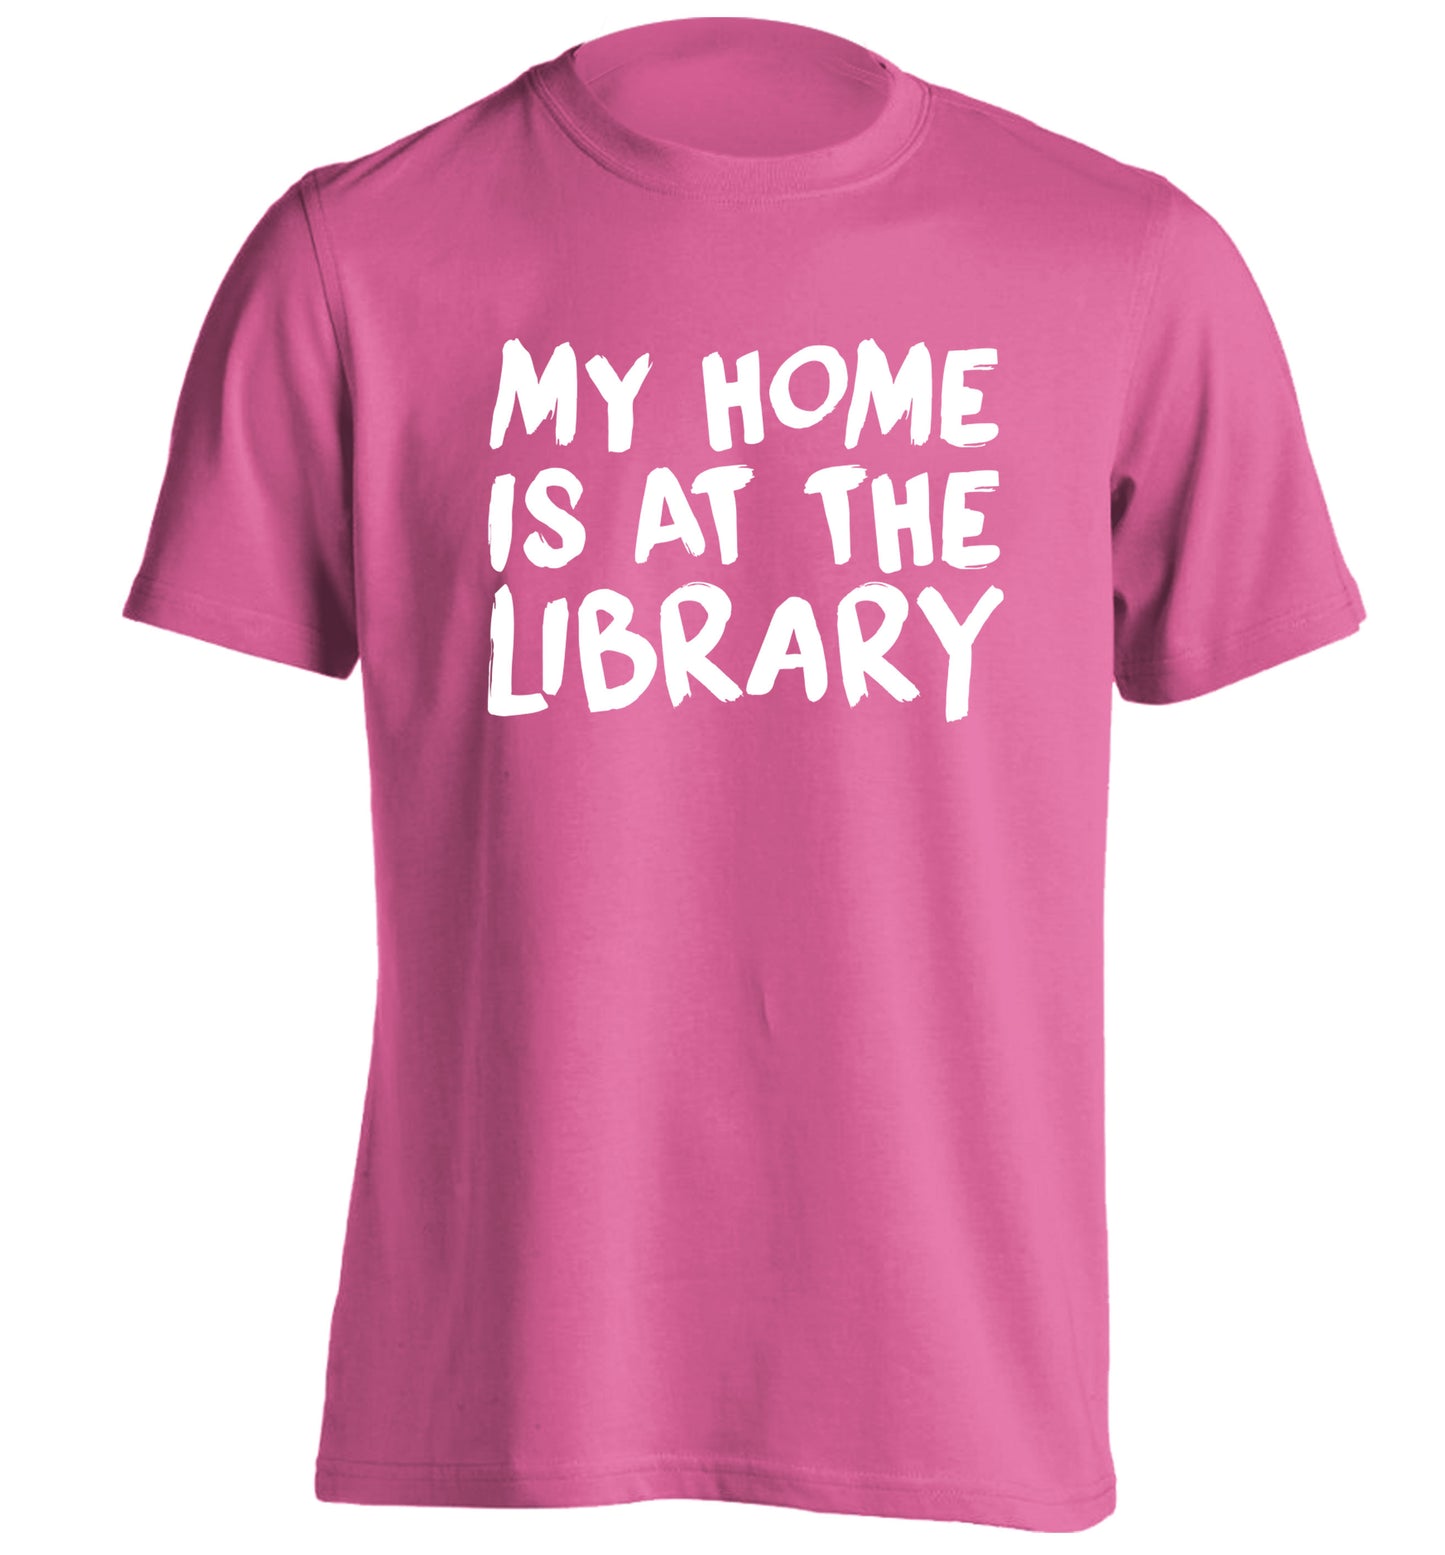 My home is at the library adults unisex pink Tshirt 2XL